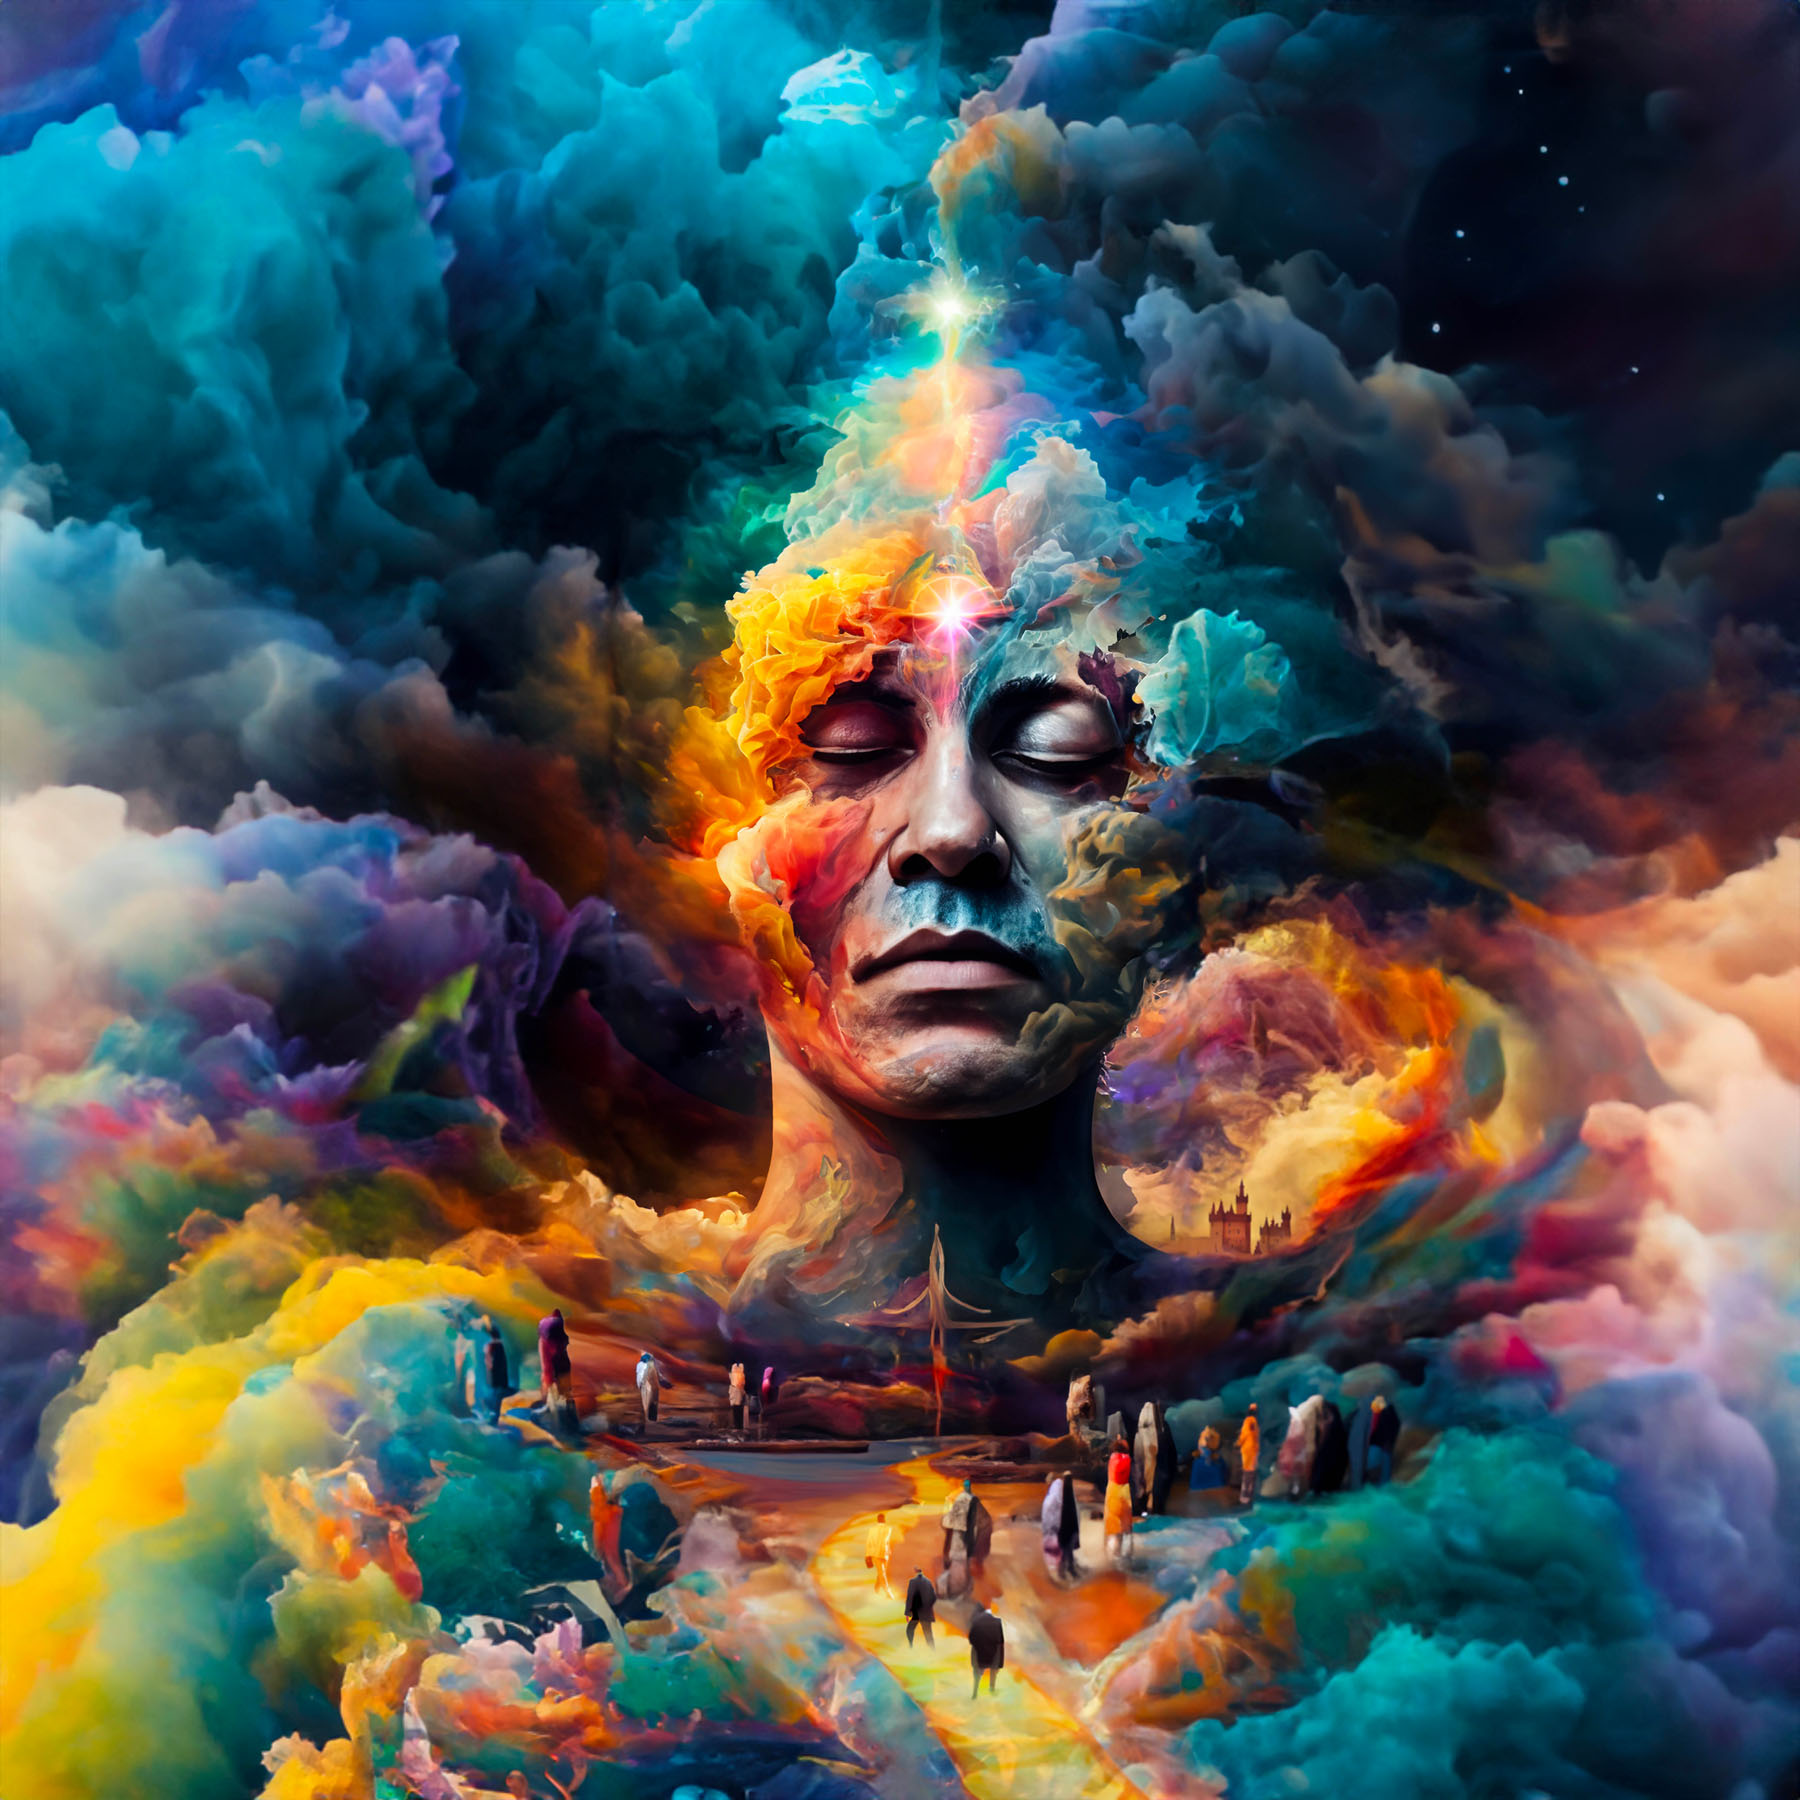 Surreal image of a giant head fading into colorful clouds that stands over a path of yellow light where smaller humans walk.